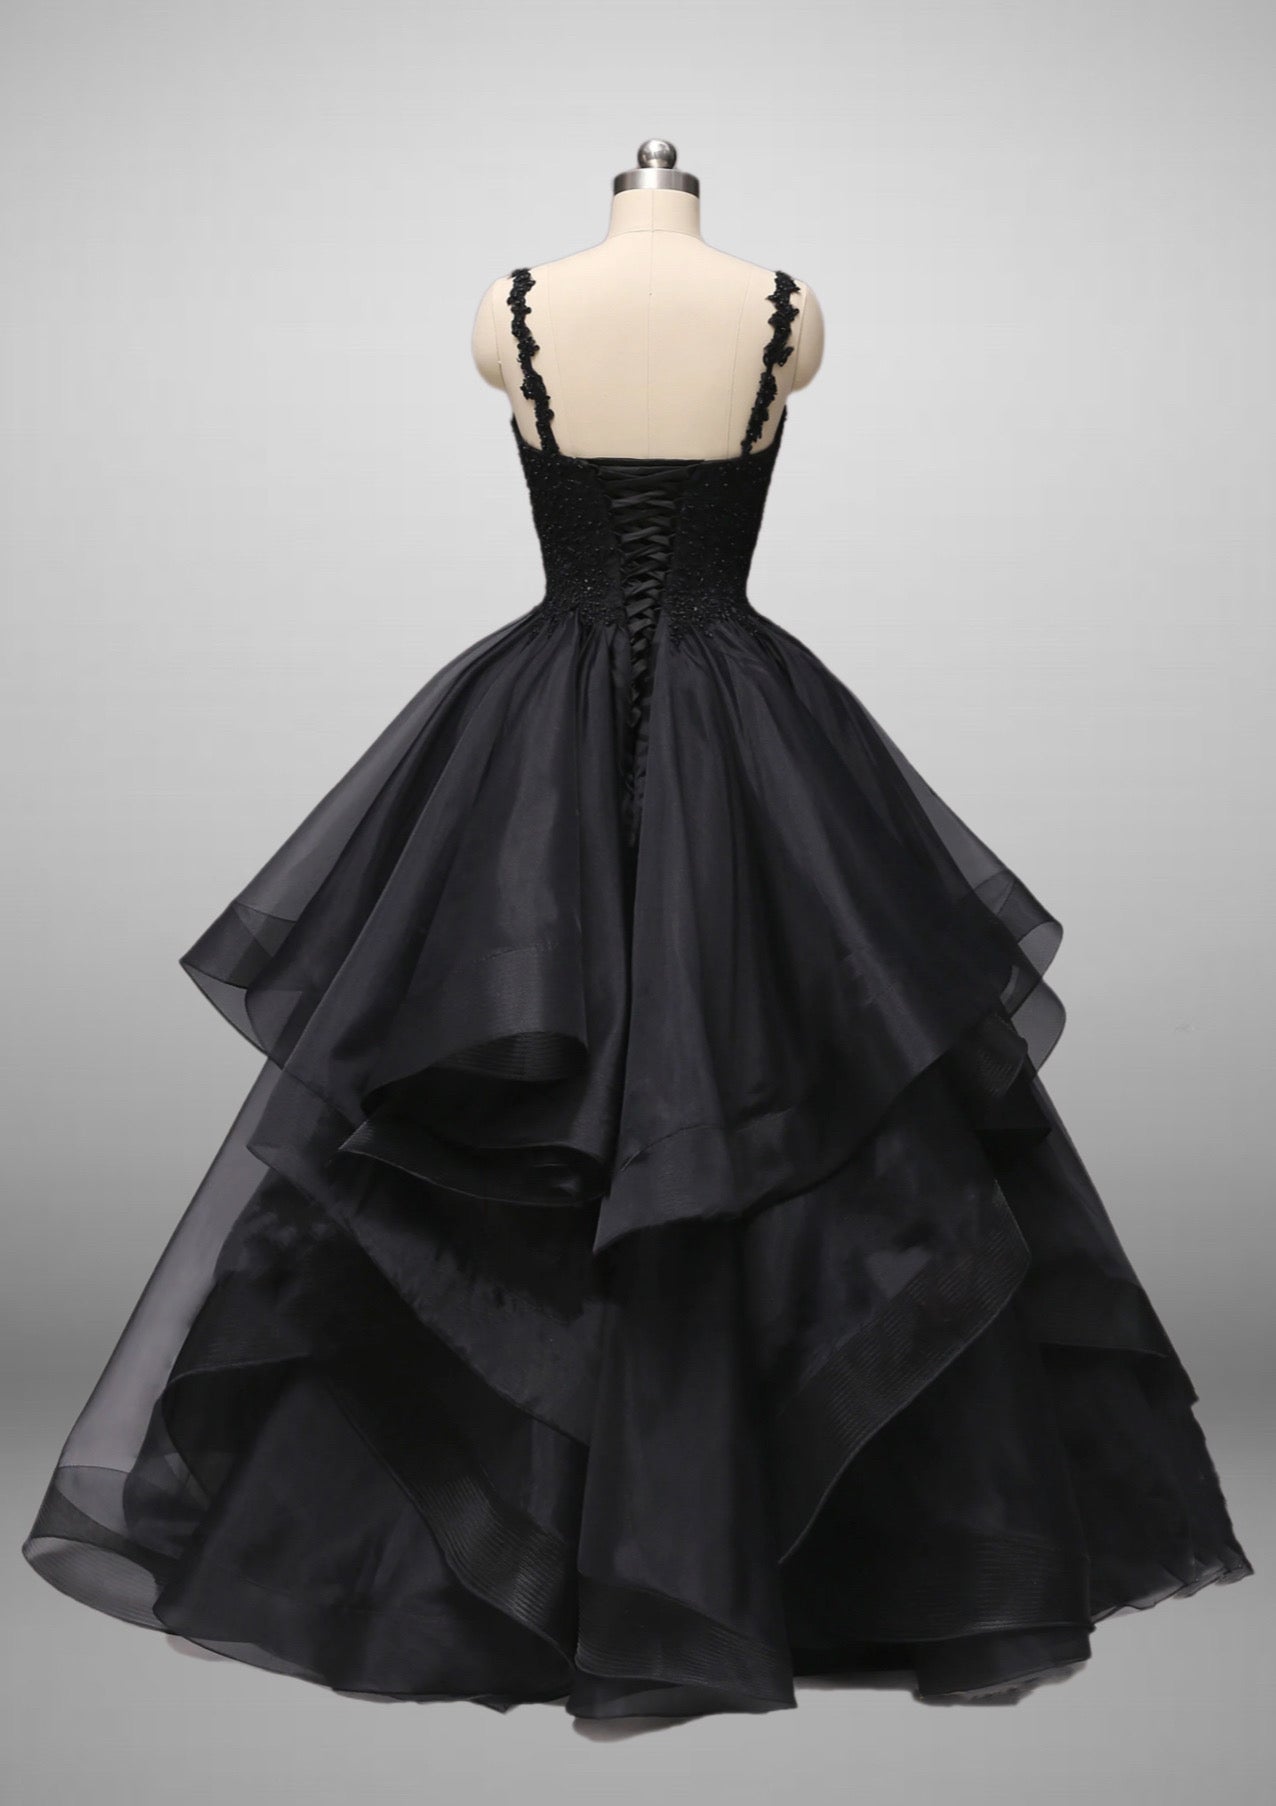 Classic Gothic Black Lace Embroidered A-Line Formal Dress With Ruffle Skirt Spaghetti Straps Plus Size